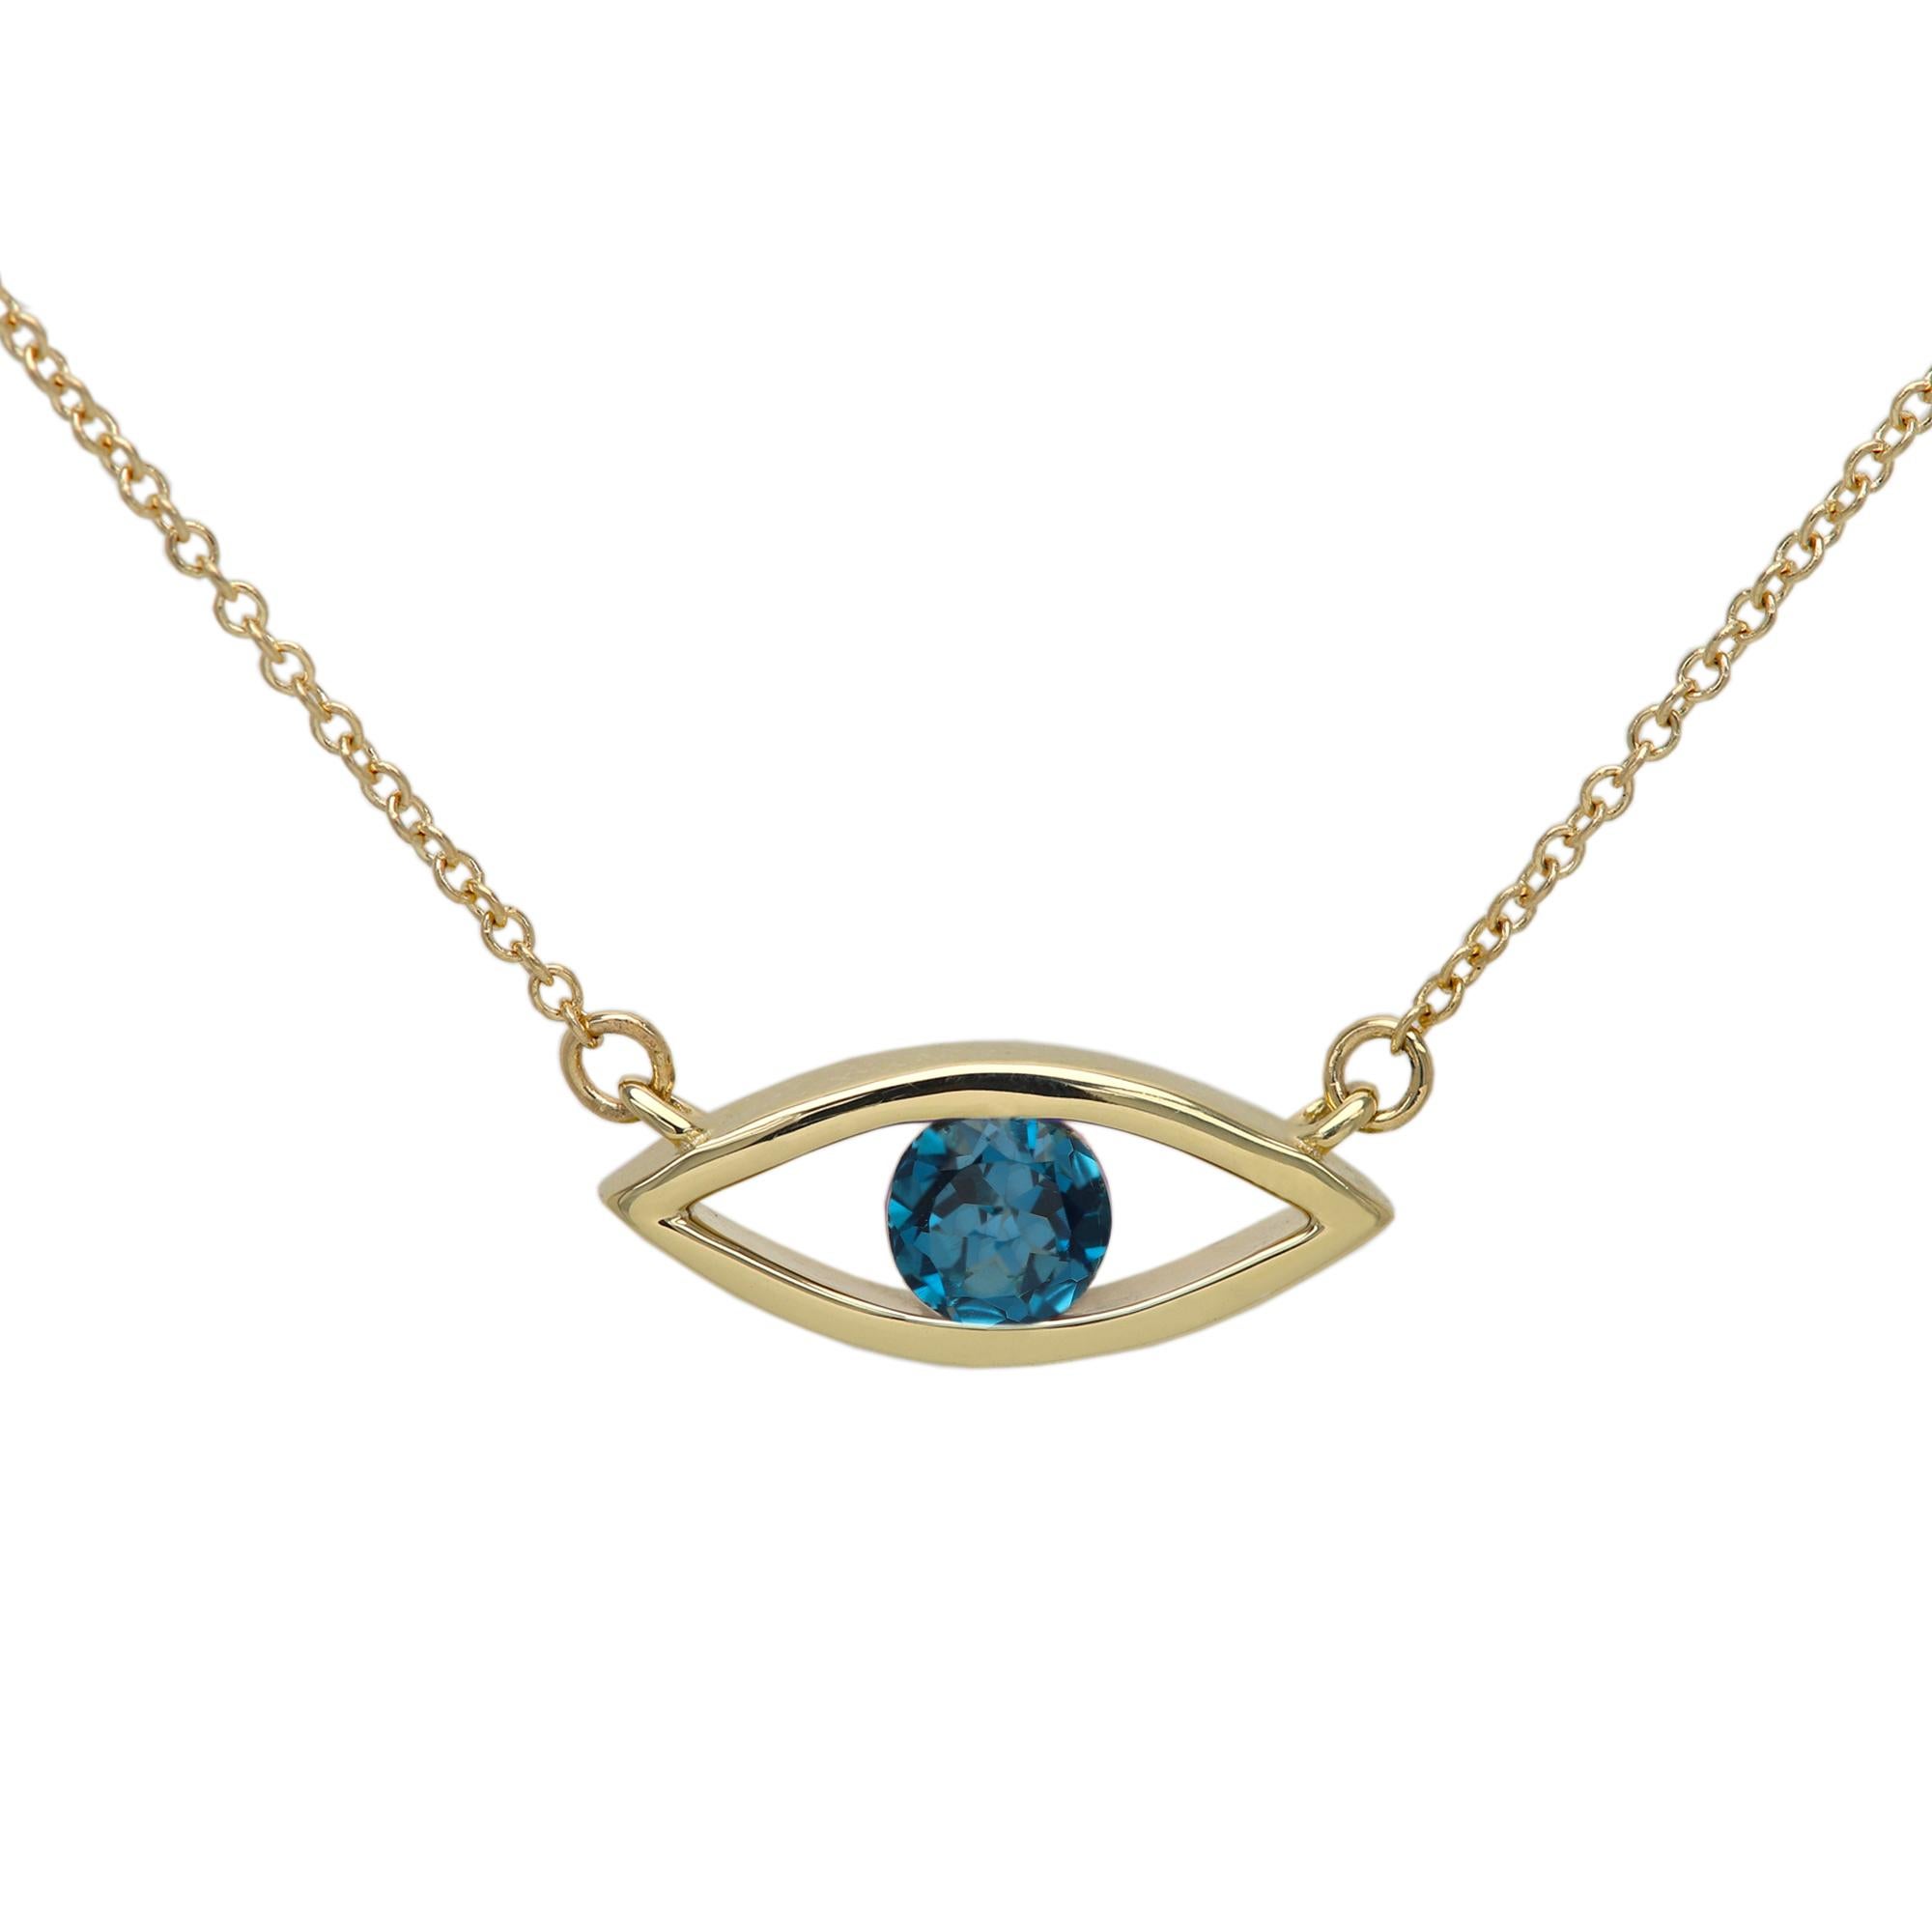 New, Very Elegant & Lovely Evil Eye Birthstone Necklace Solid 14k Yellow Gold with Natural London Blue Topaz gemstone 
Set in Yellow Gold Evil Eye - Good Luck & protection Necklace
Classic Cable Chain and Lobster Lock - all 14k, 
Chain Length - as